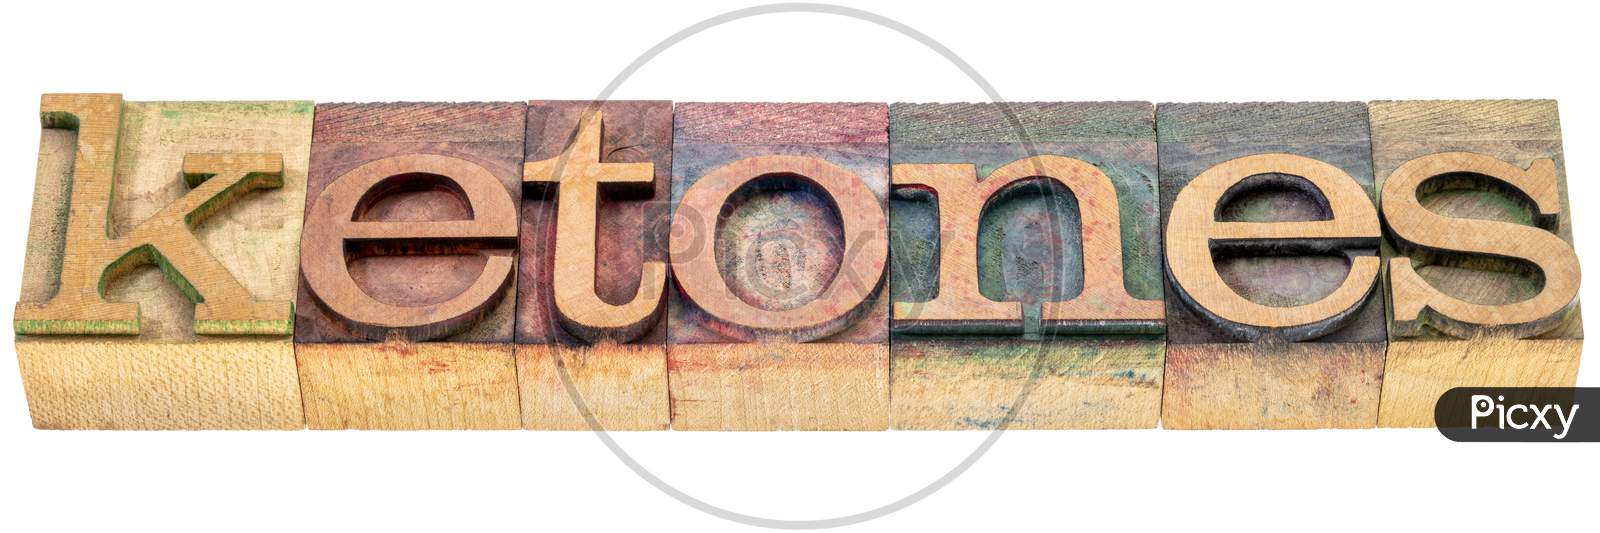 Ketones - Isolated Word Abstract In Vintage Letterpress Wood Type Blocks, Keto Diet Concept